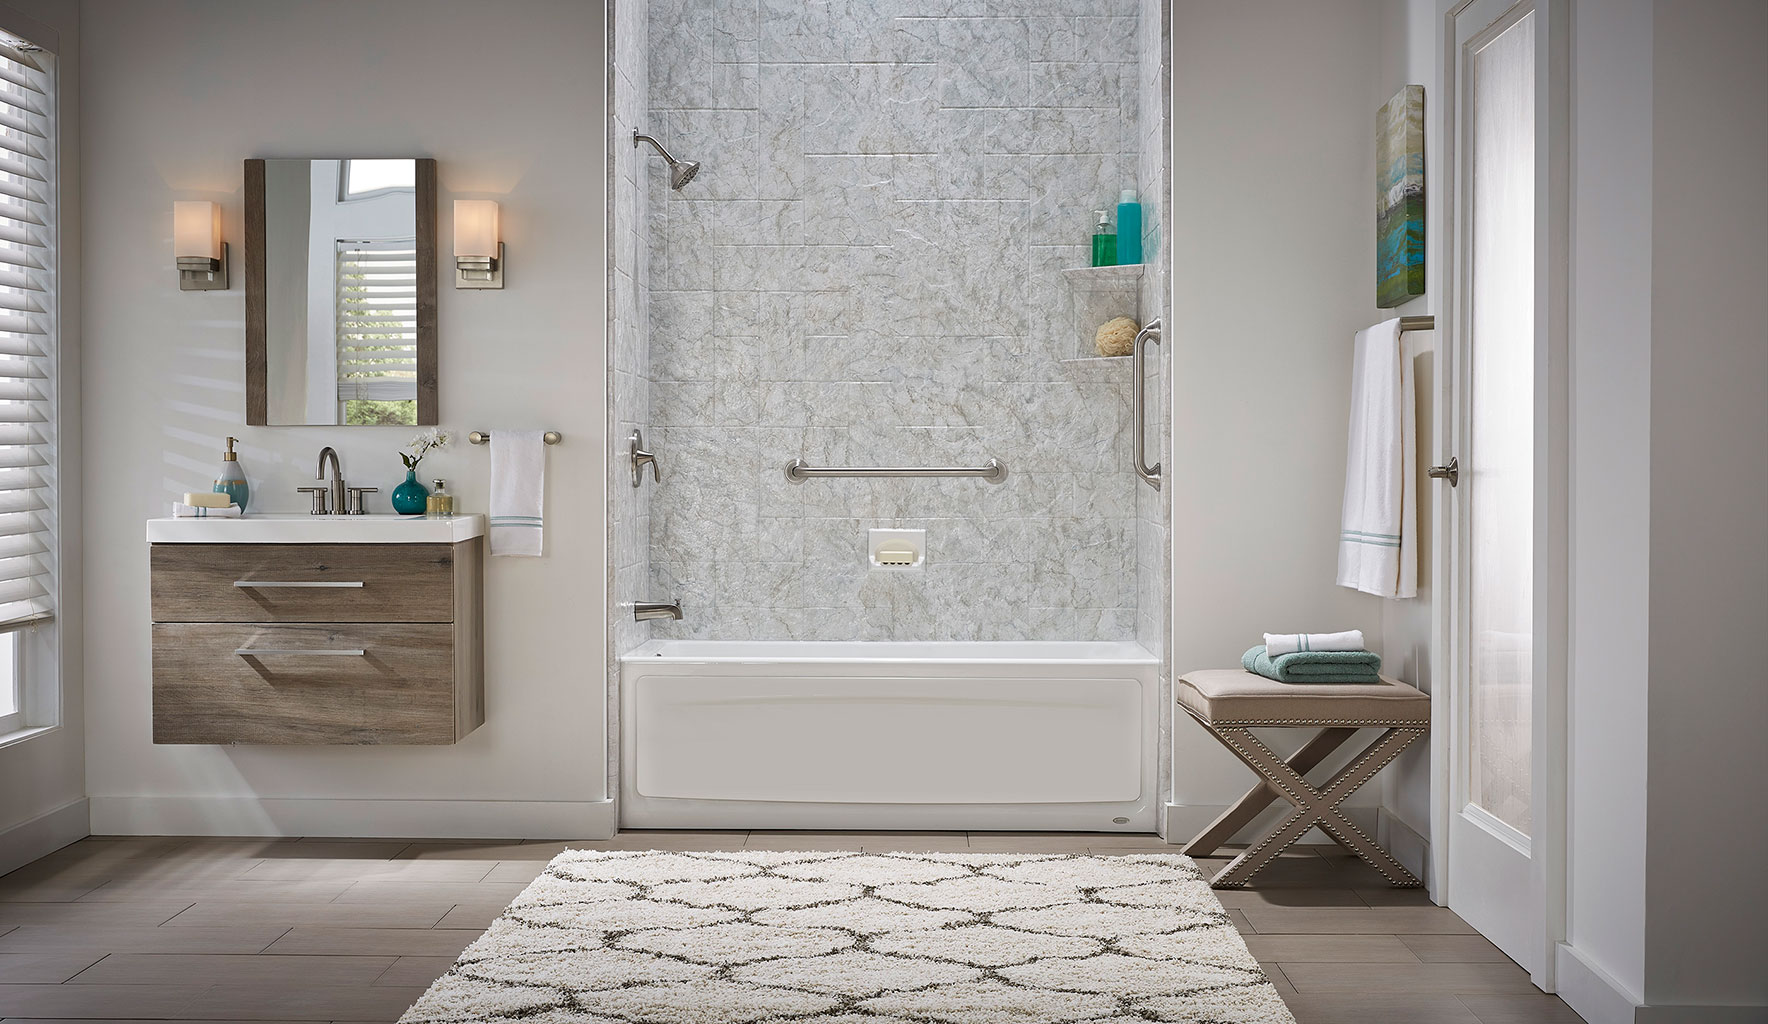 Bathroom Safety Is Important: A Shower Remodel Can Help